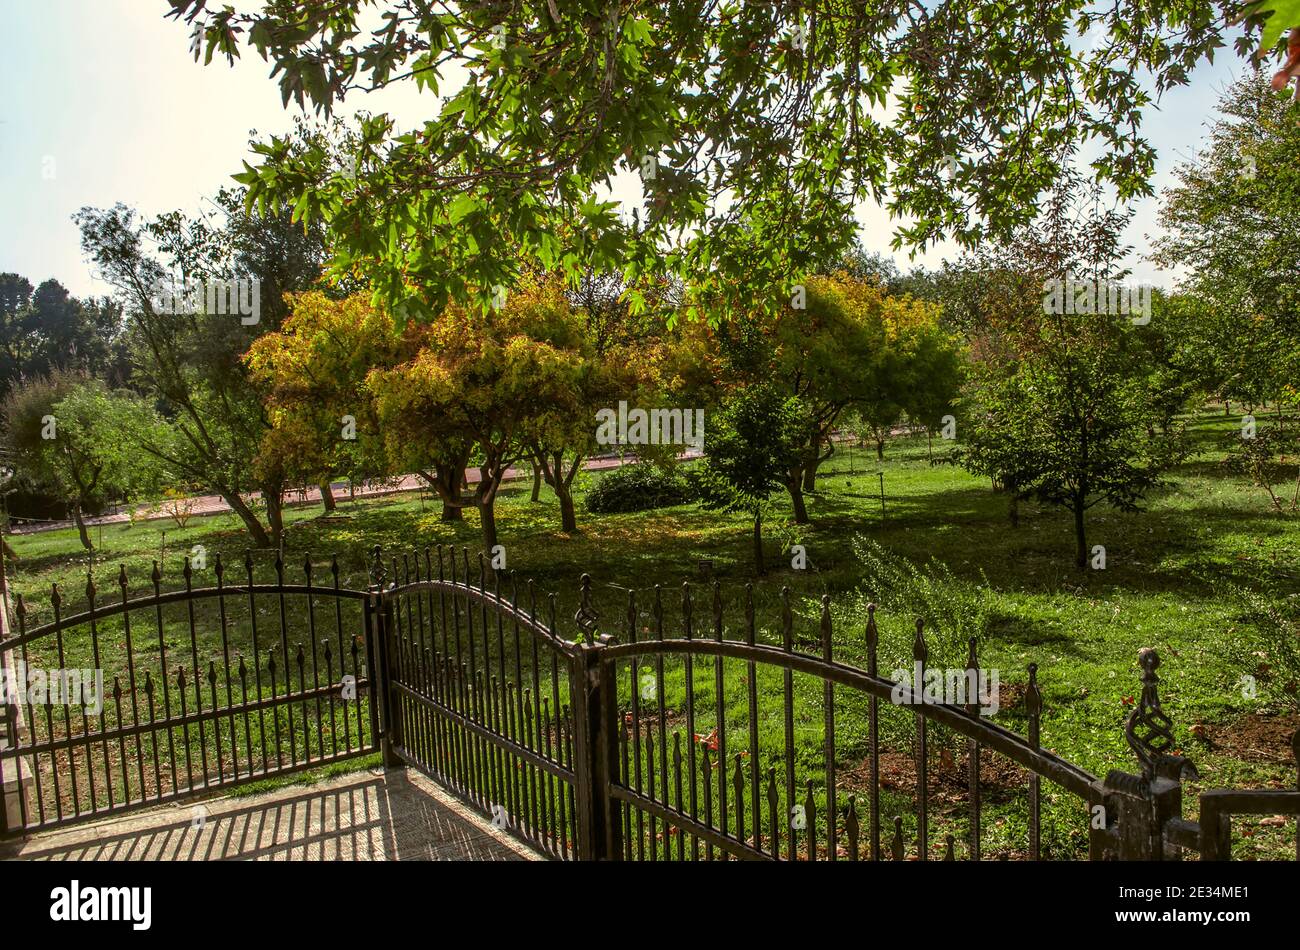 Decorative bridge with forged lattice railings leads to a lawn with trees in the Botanical Garden in the suburbs of Tehran on an autumn sunny day Stock Photo